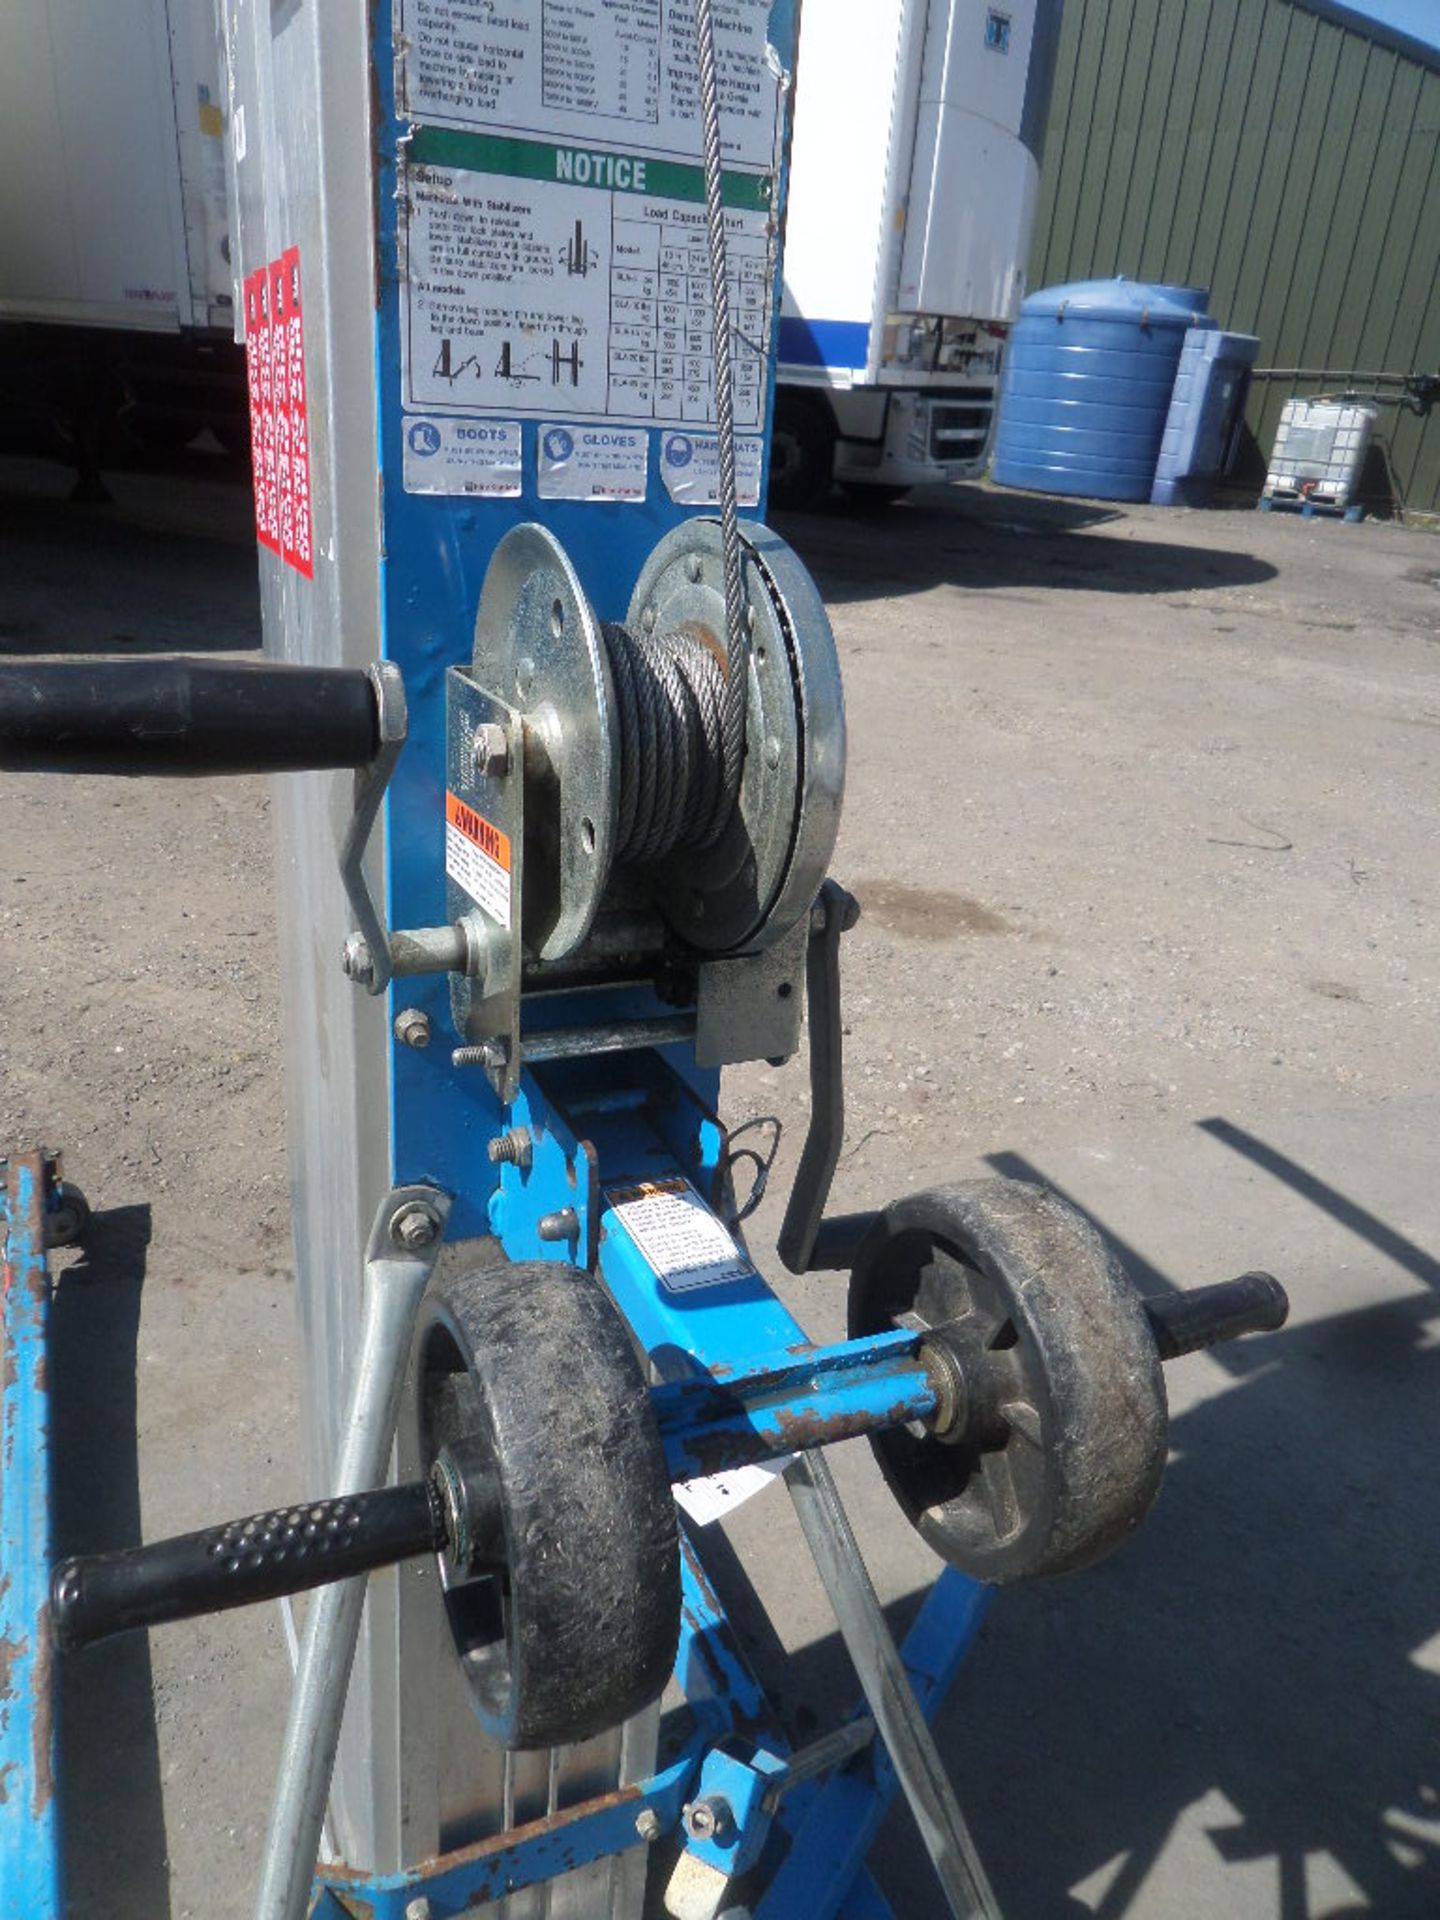 GENIE SUPERLIFT ADVANTAGE SLA 25 {027279} 295KG LIFTER STACKER - MANUAL Max load it can carry is 295 - Image 3 of 5